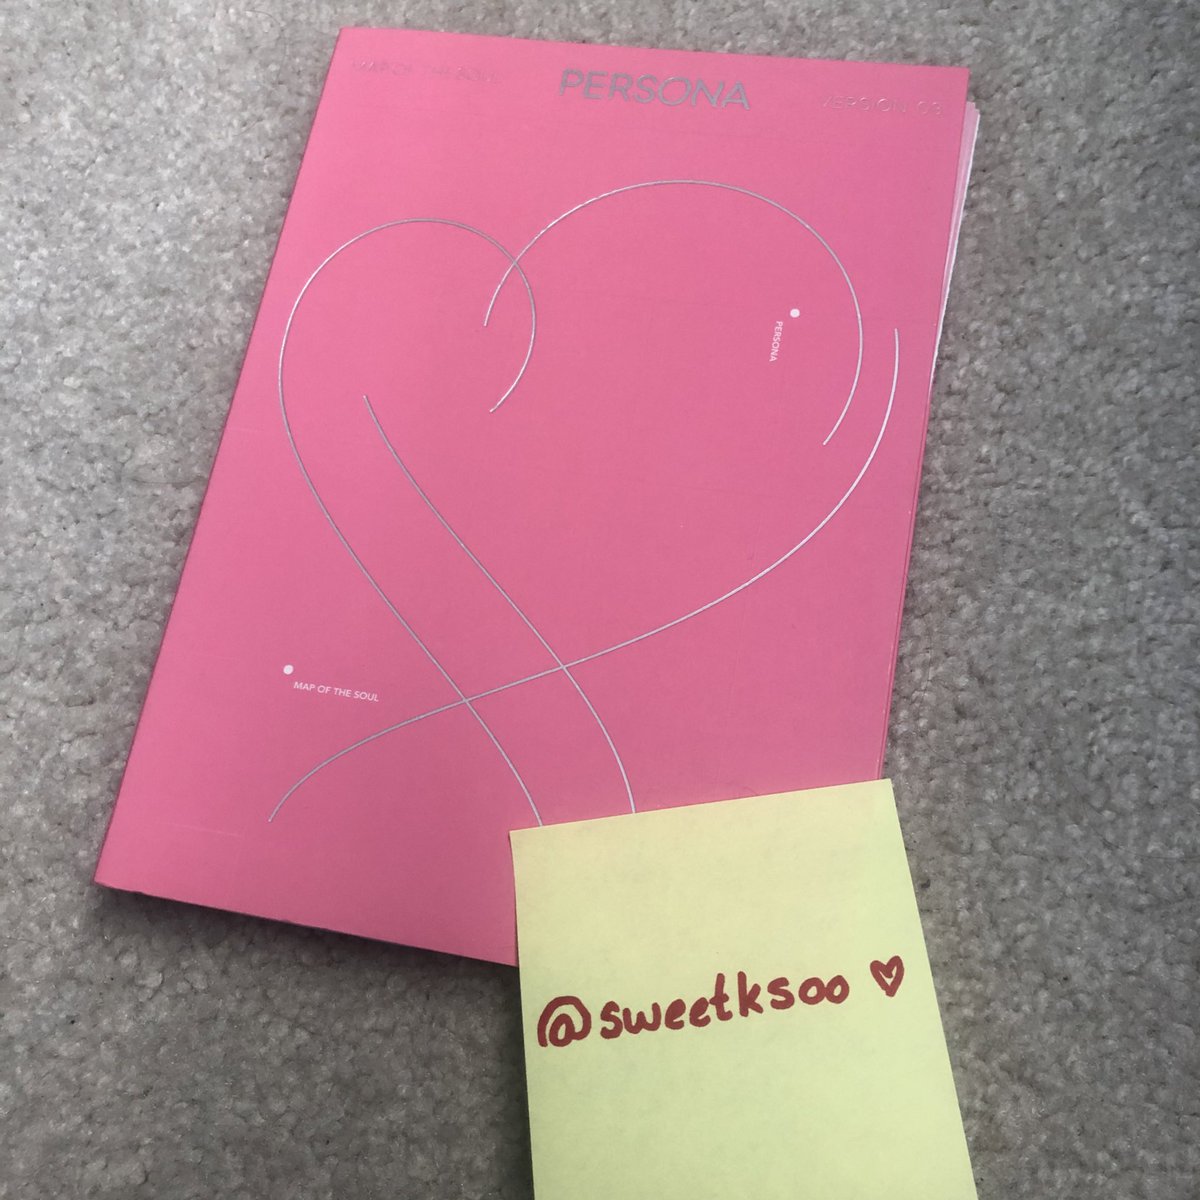 2.) MAP OF THE SOUL: PERSONA (Version 03) Album w/ Jin PhotocardPRICE: $23.00 CAD + shippingContents are shown in the photo below 